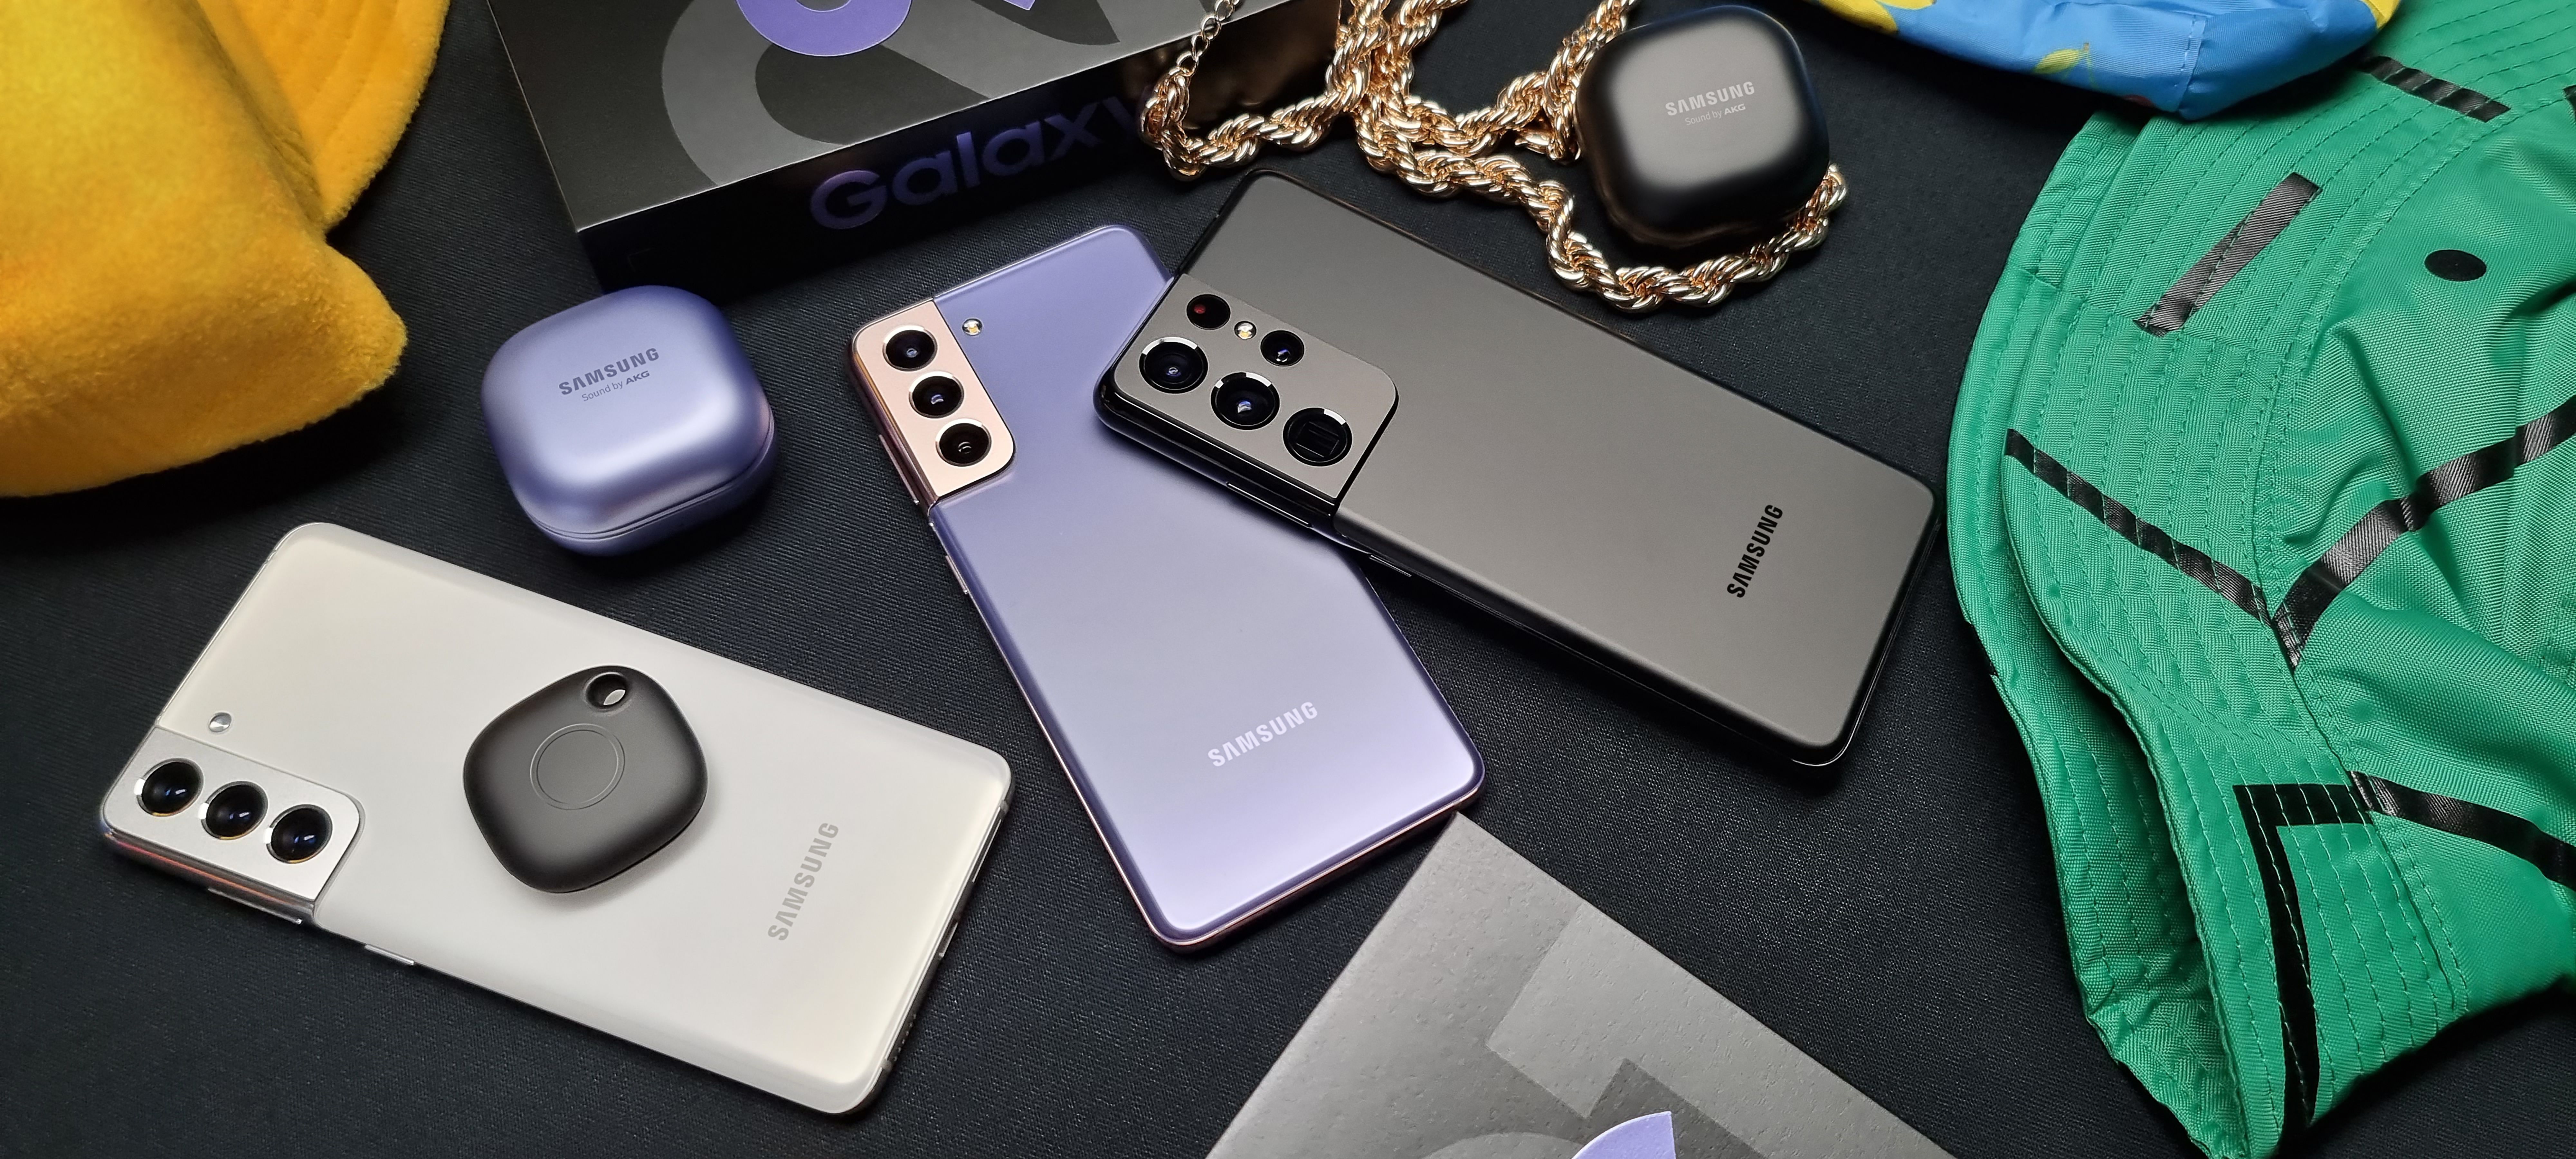 The Samsung S21 series phones on a table with some accessories